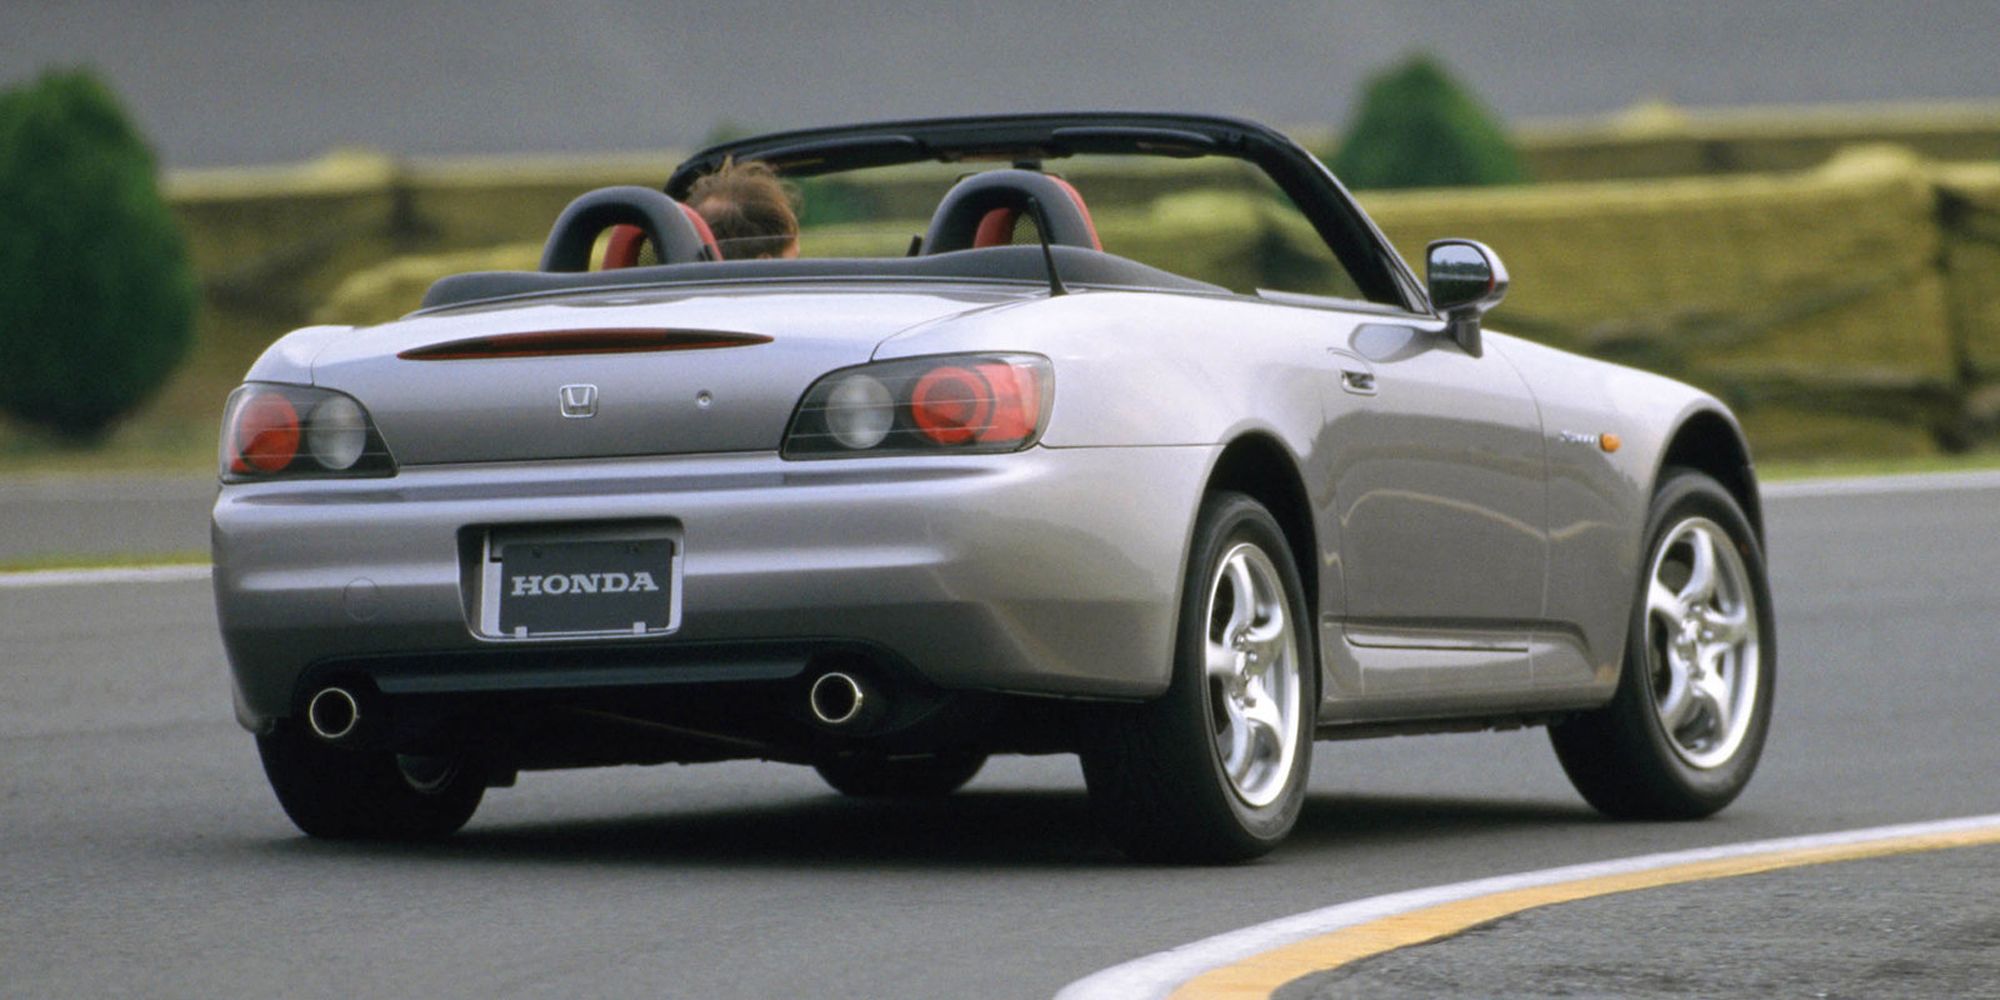 The rear of the S2000 on the move